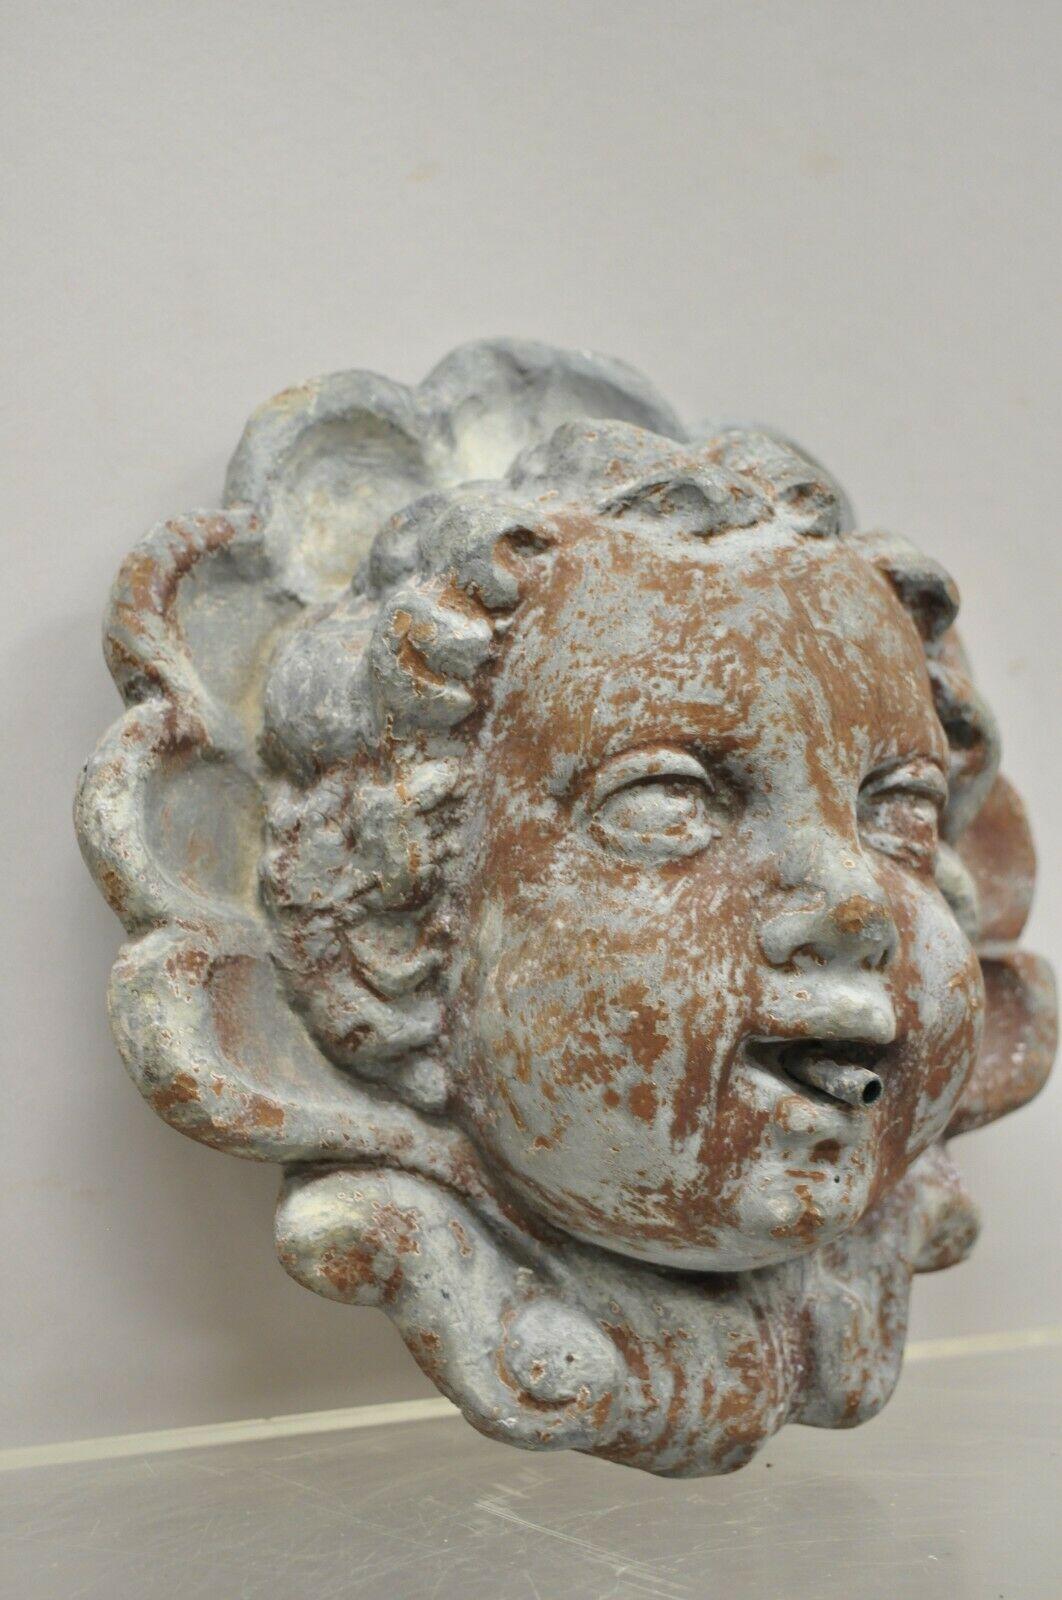 Antique French Neoclassical Small Lead Cherub Head Garden Wall Fountain. Item features a nicely cast lead form, wonderful detail and patina, very nice item, great style and form, approx. 10lbs. Circa Early to Mid 20th Century. Measurements: 9